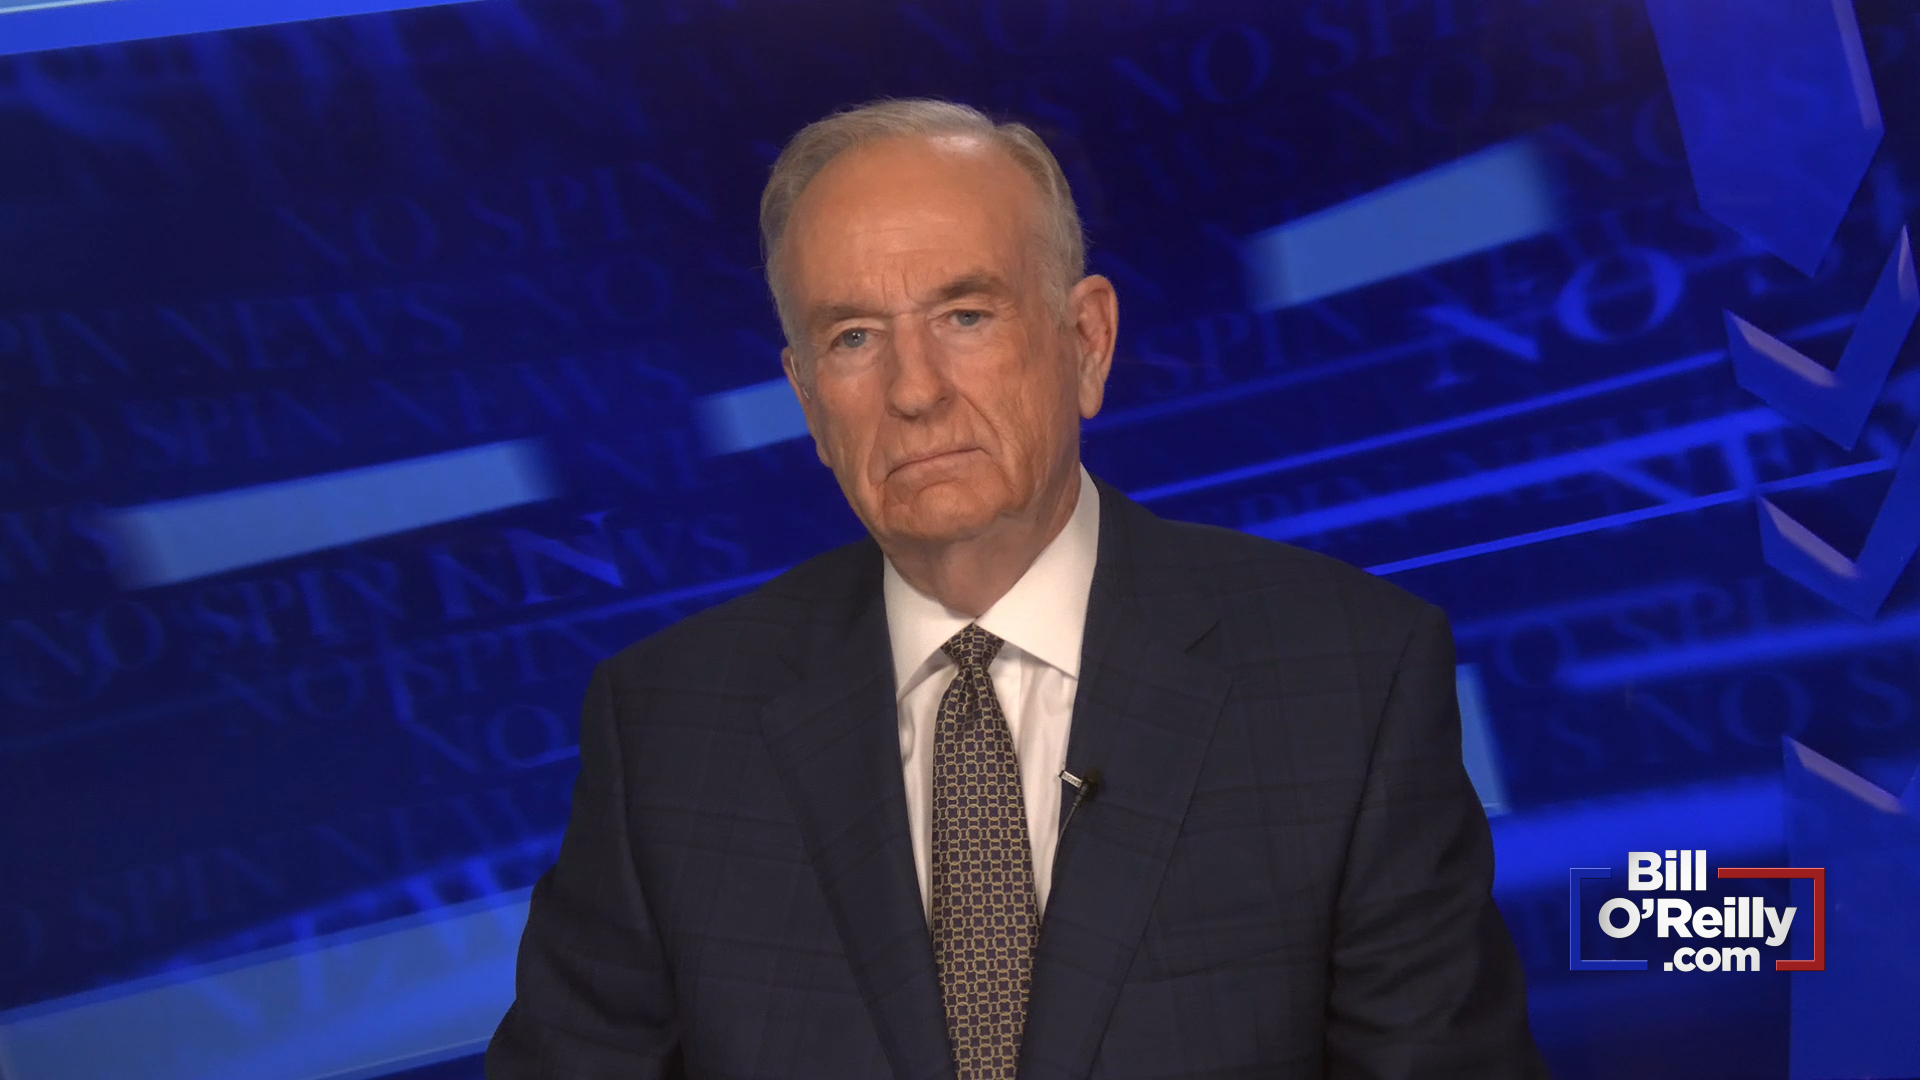 O'Reilly: 'Progressives Hate the Country of Israel'